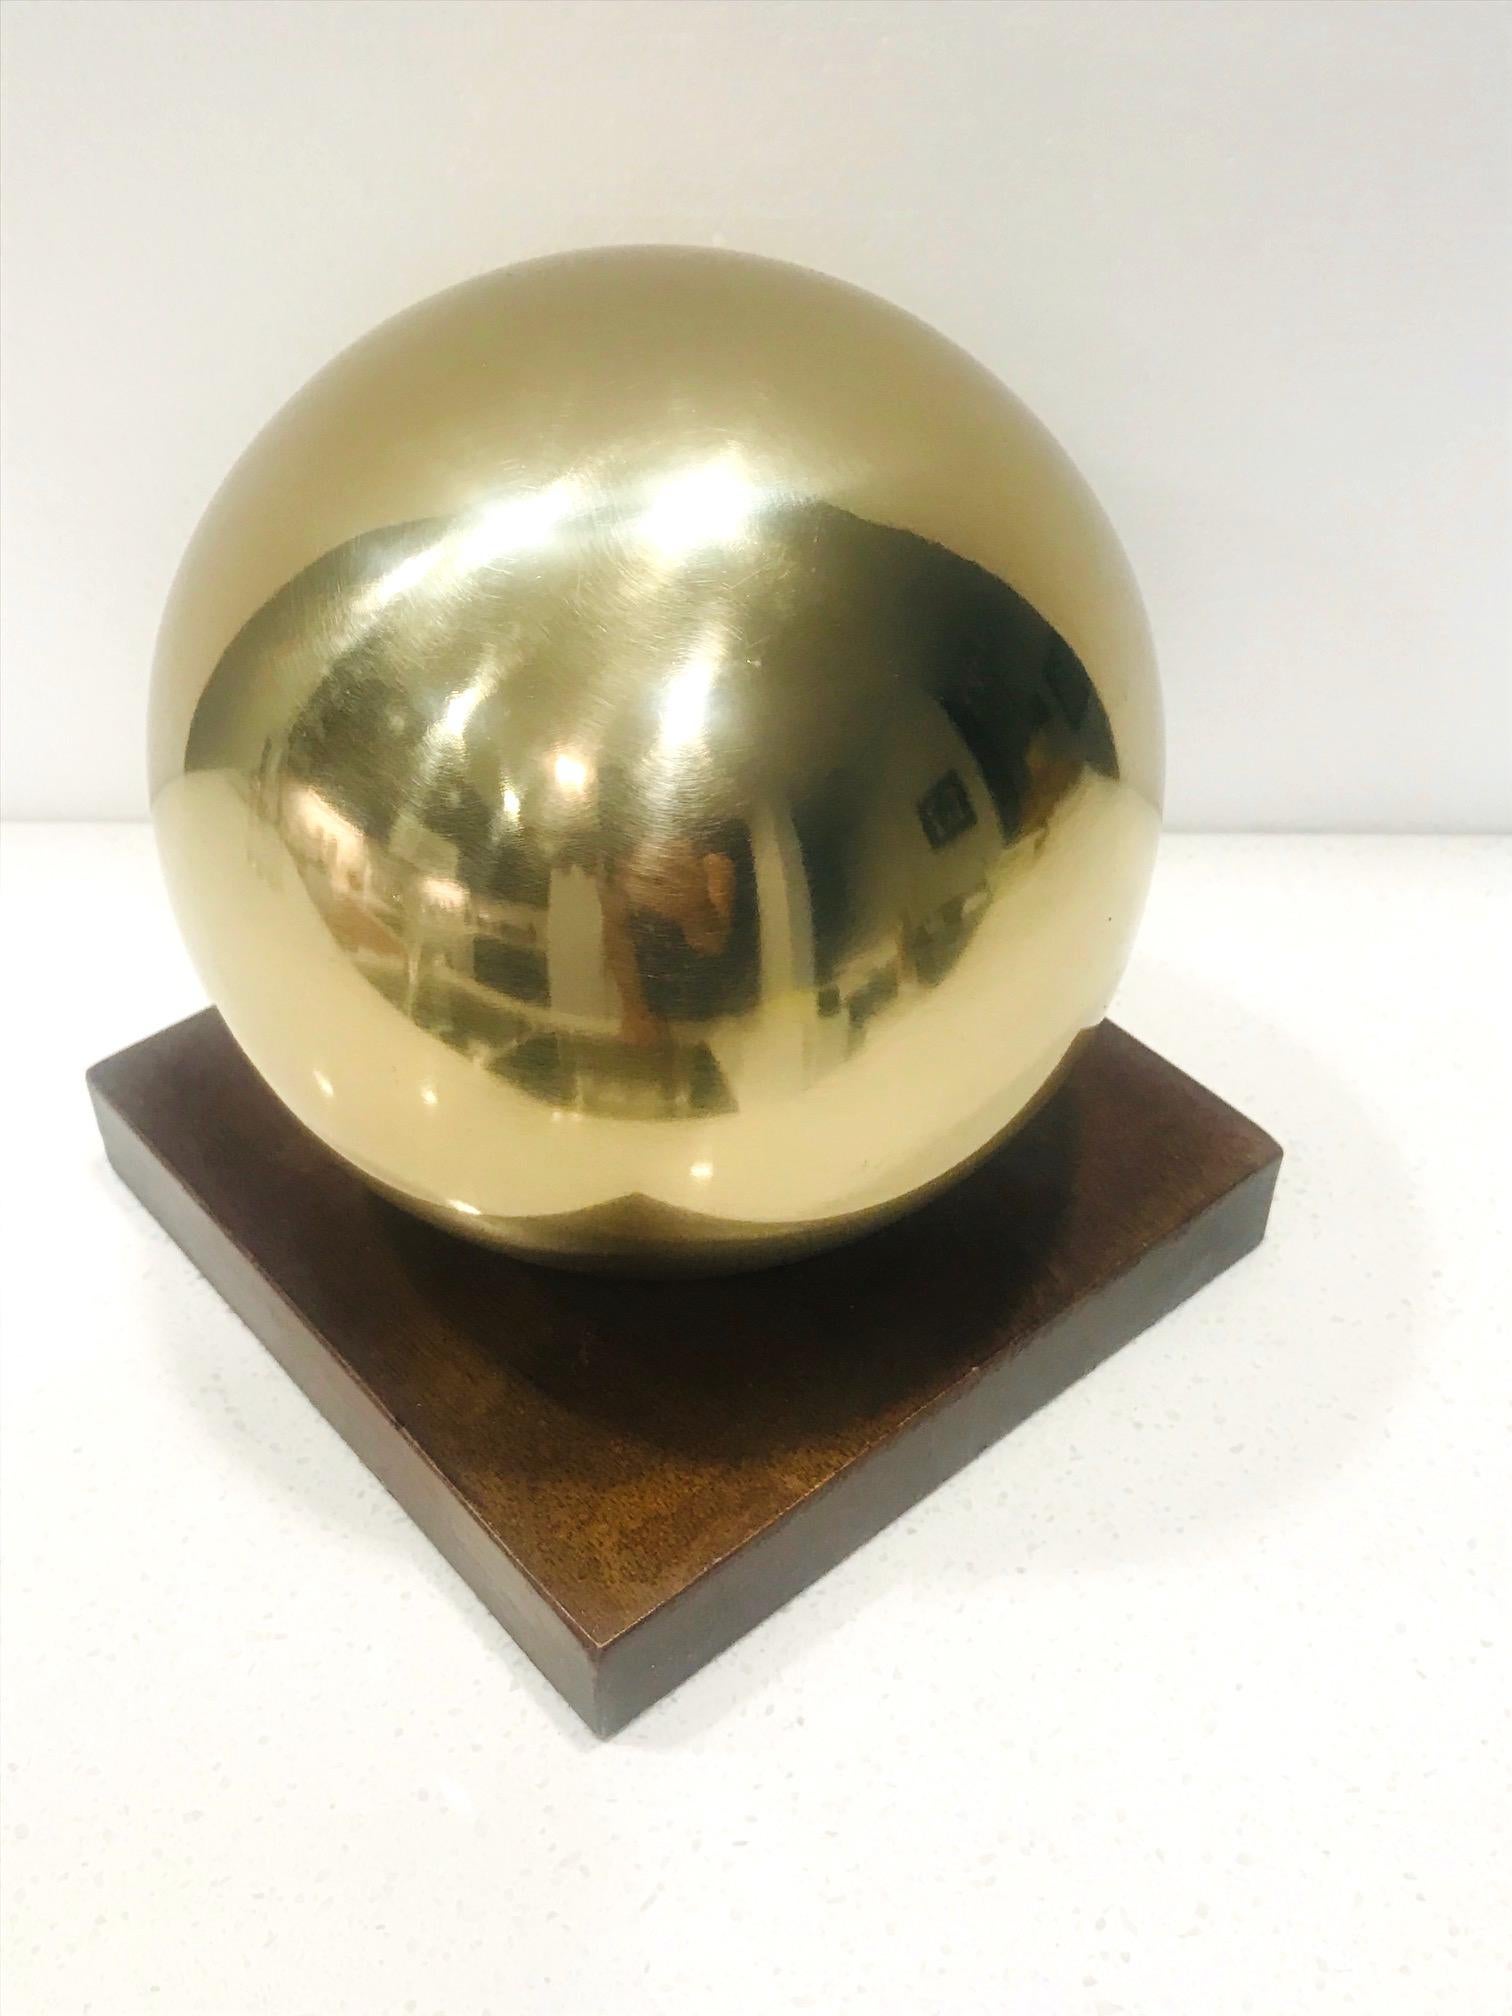 Hand-Crafted Mid-Century Modern Architectural Brass Globe Sculpture and Bookend, 1970s